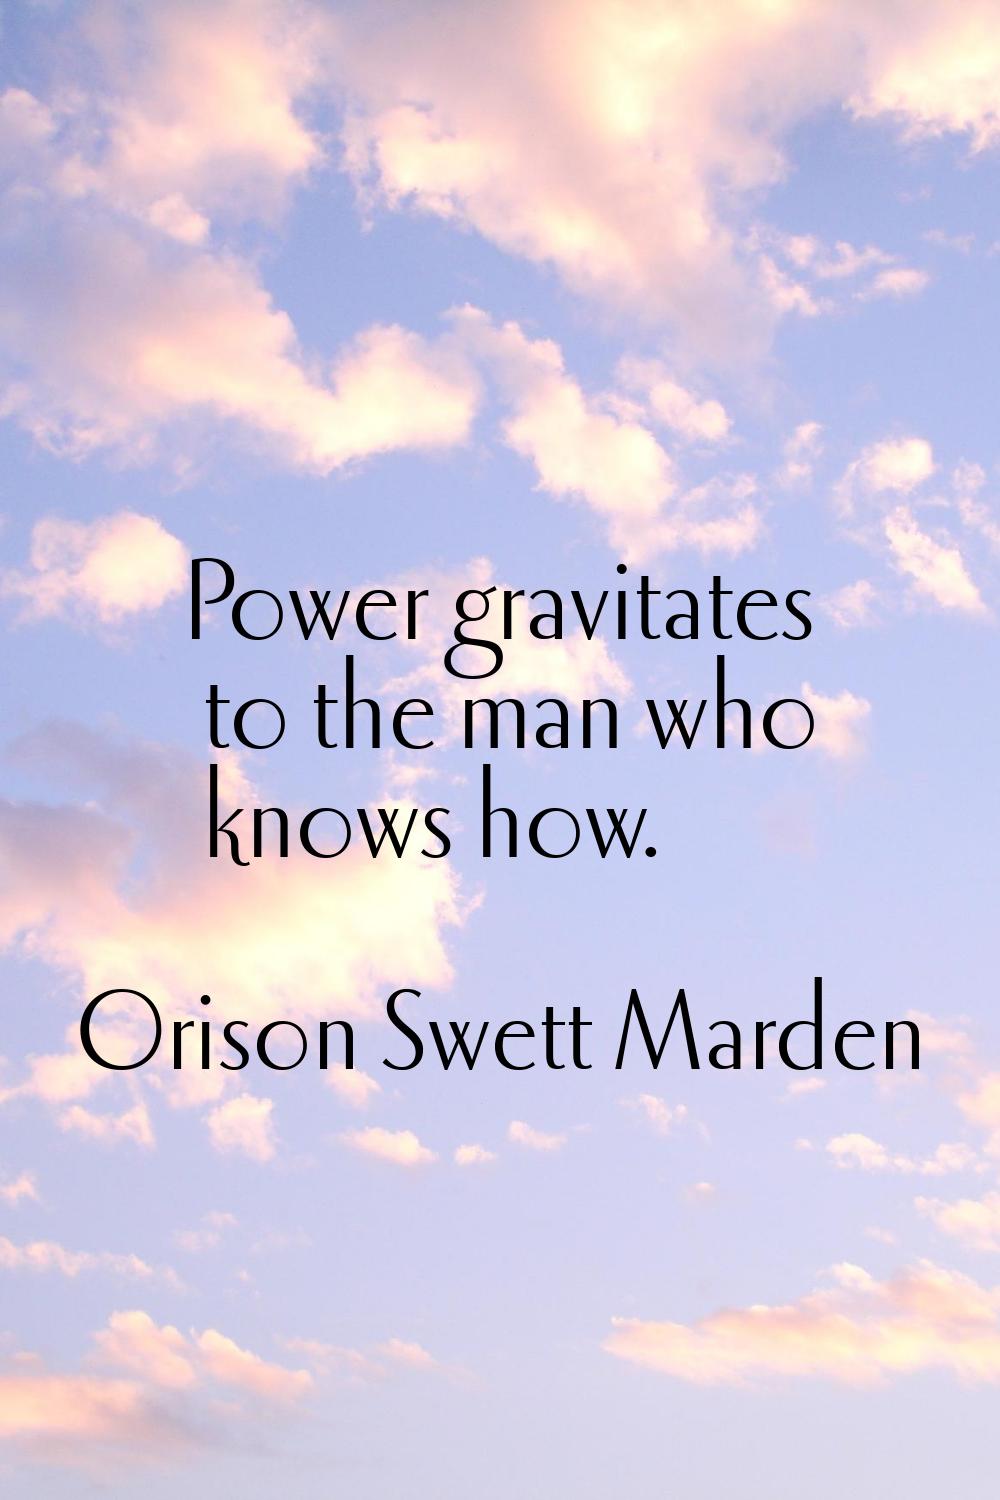 Power gravitates to the man who knows how.